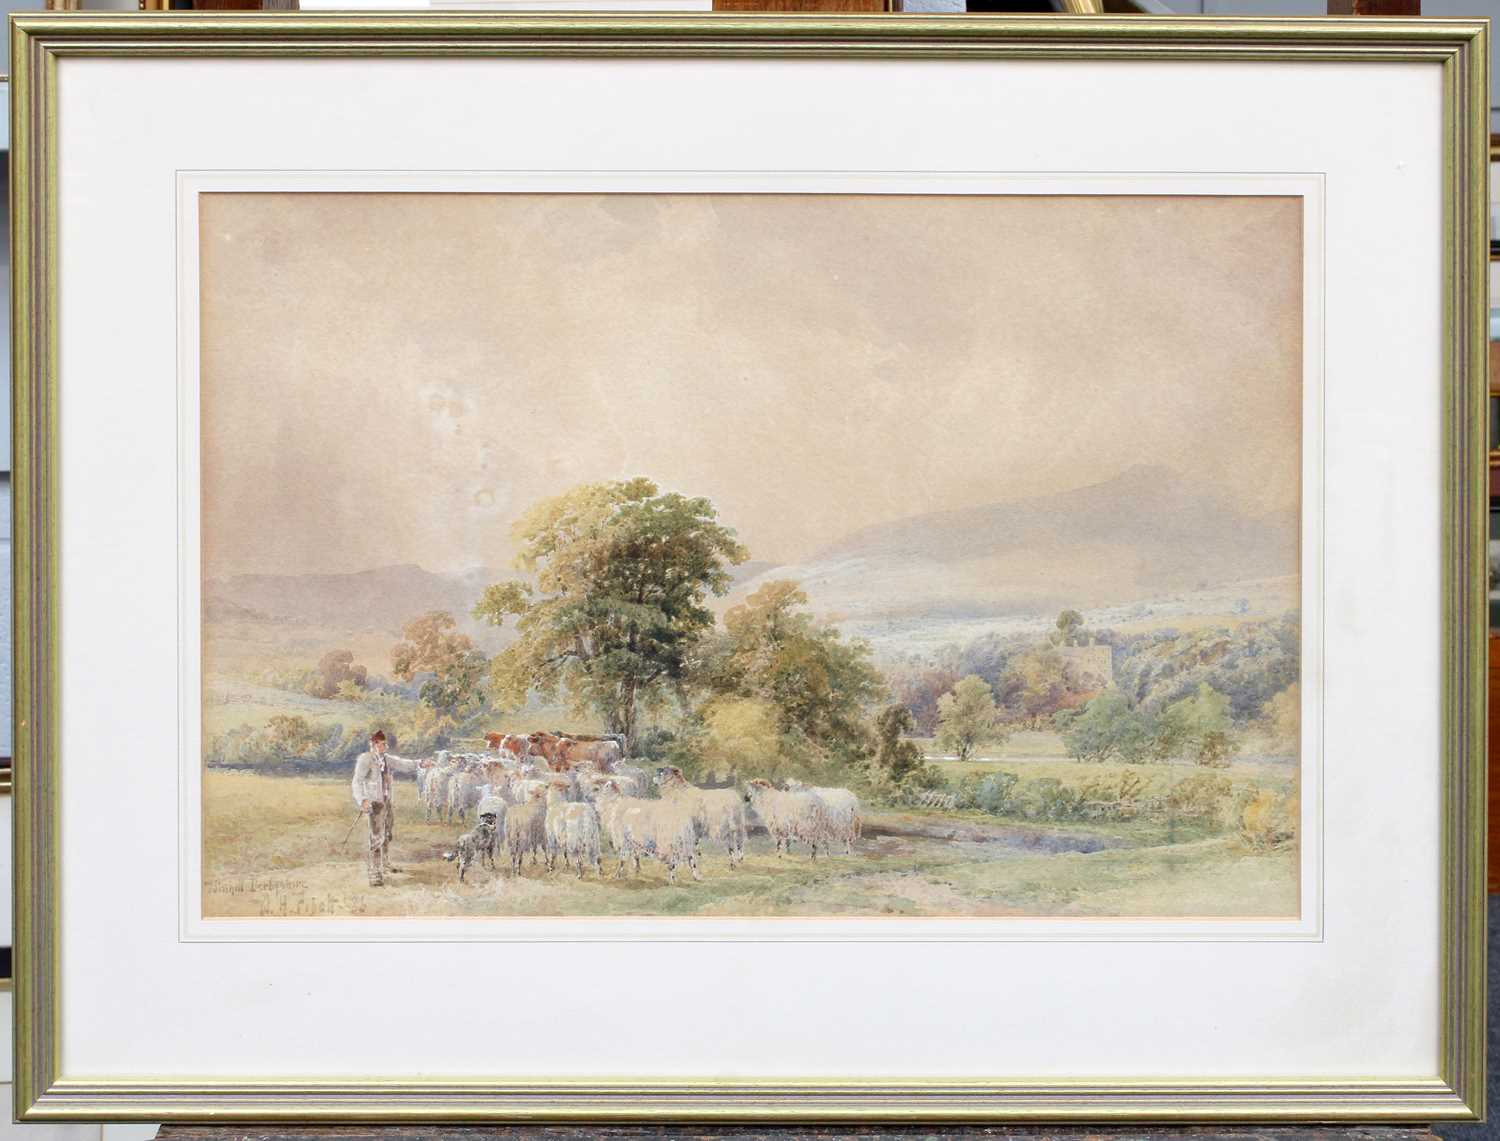 William Henry Pigott (1810-1901) "Winhill Derbyshire" Signed, inscribed and dated (18)86, - Image 3 of 4